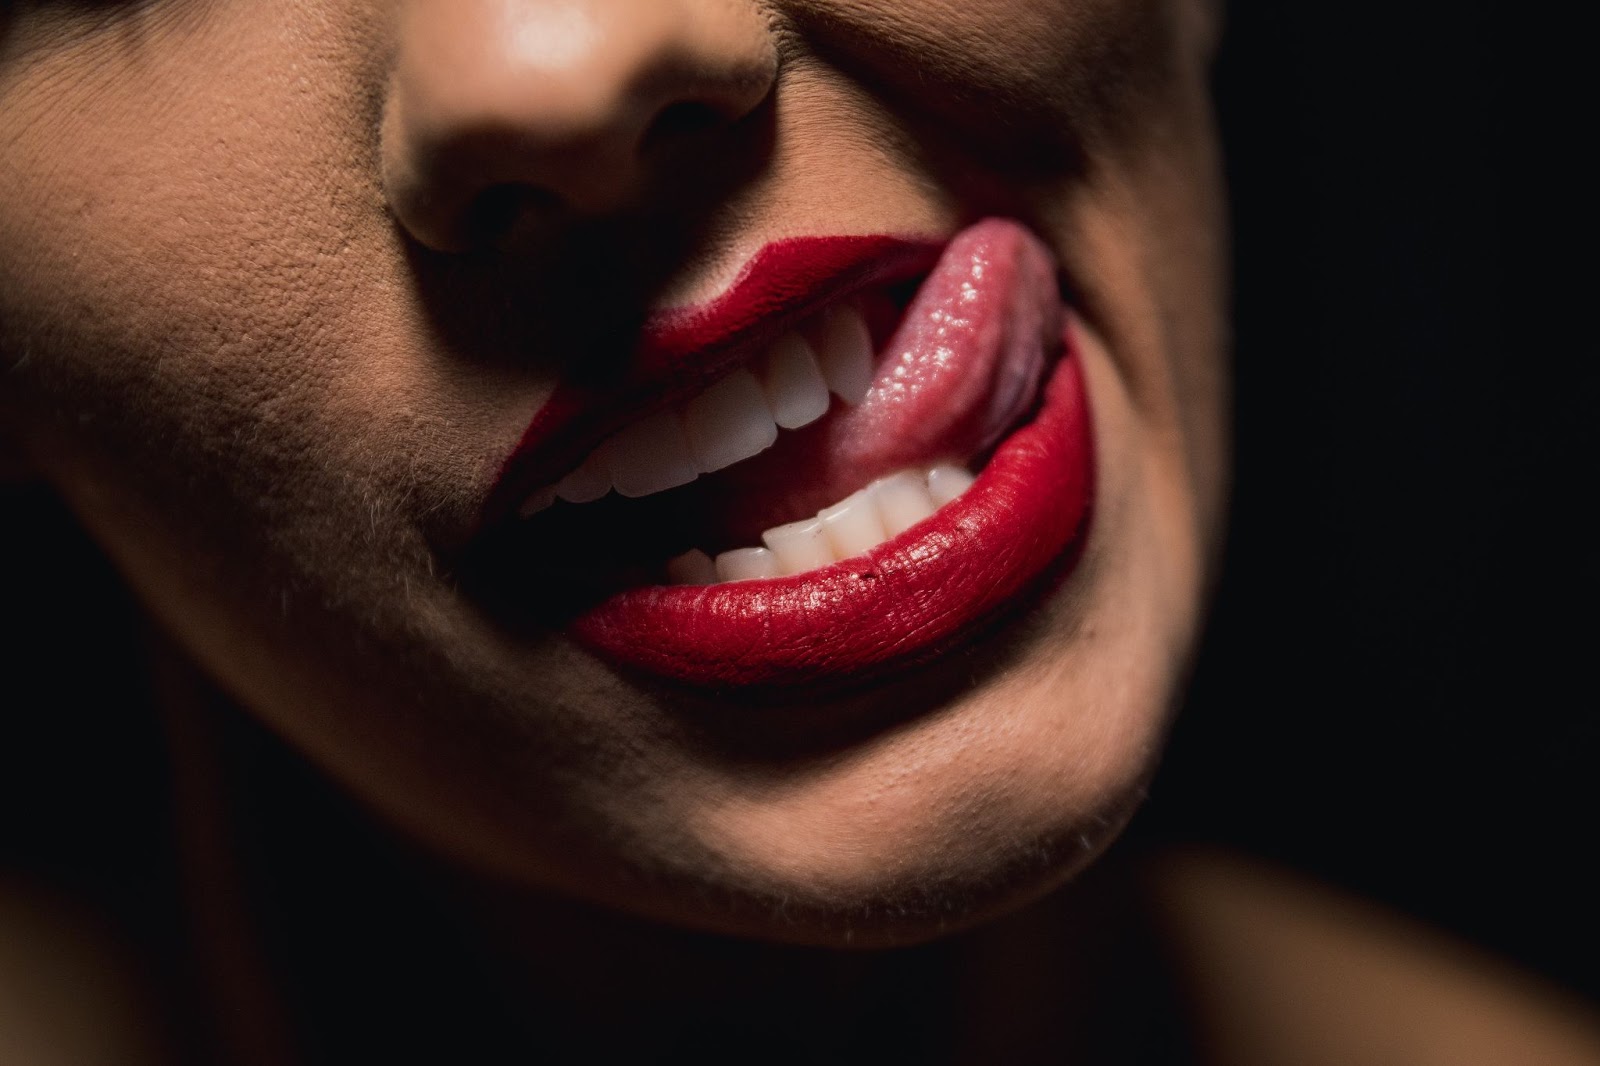 Shot of a woman's seductive lips with red lipstick and tongue out